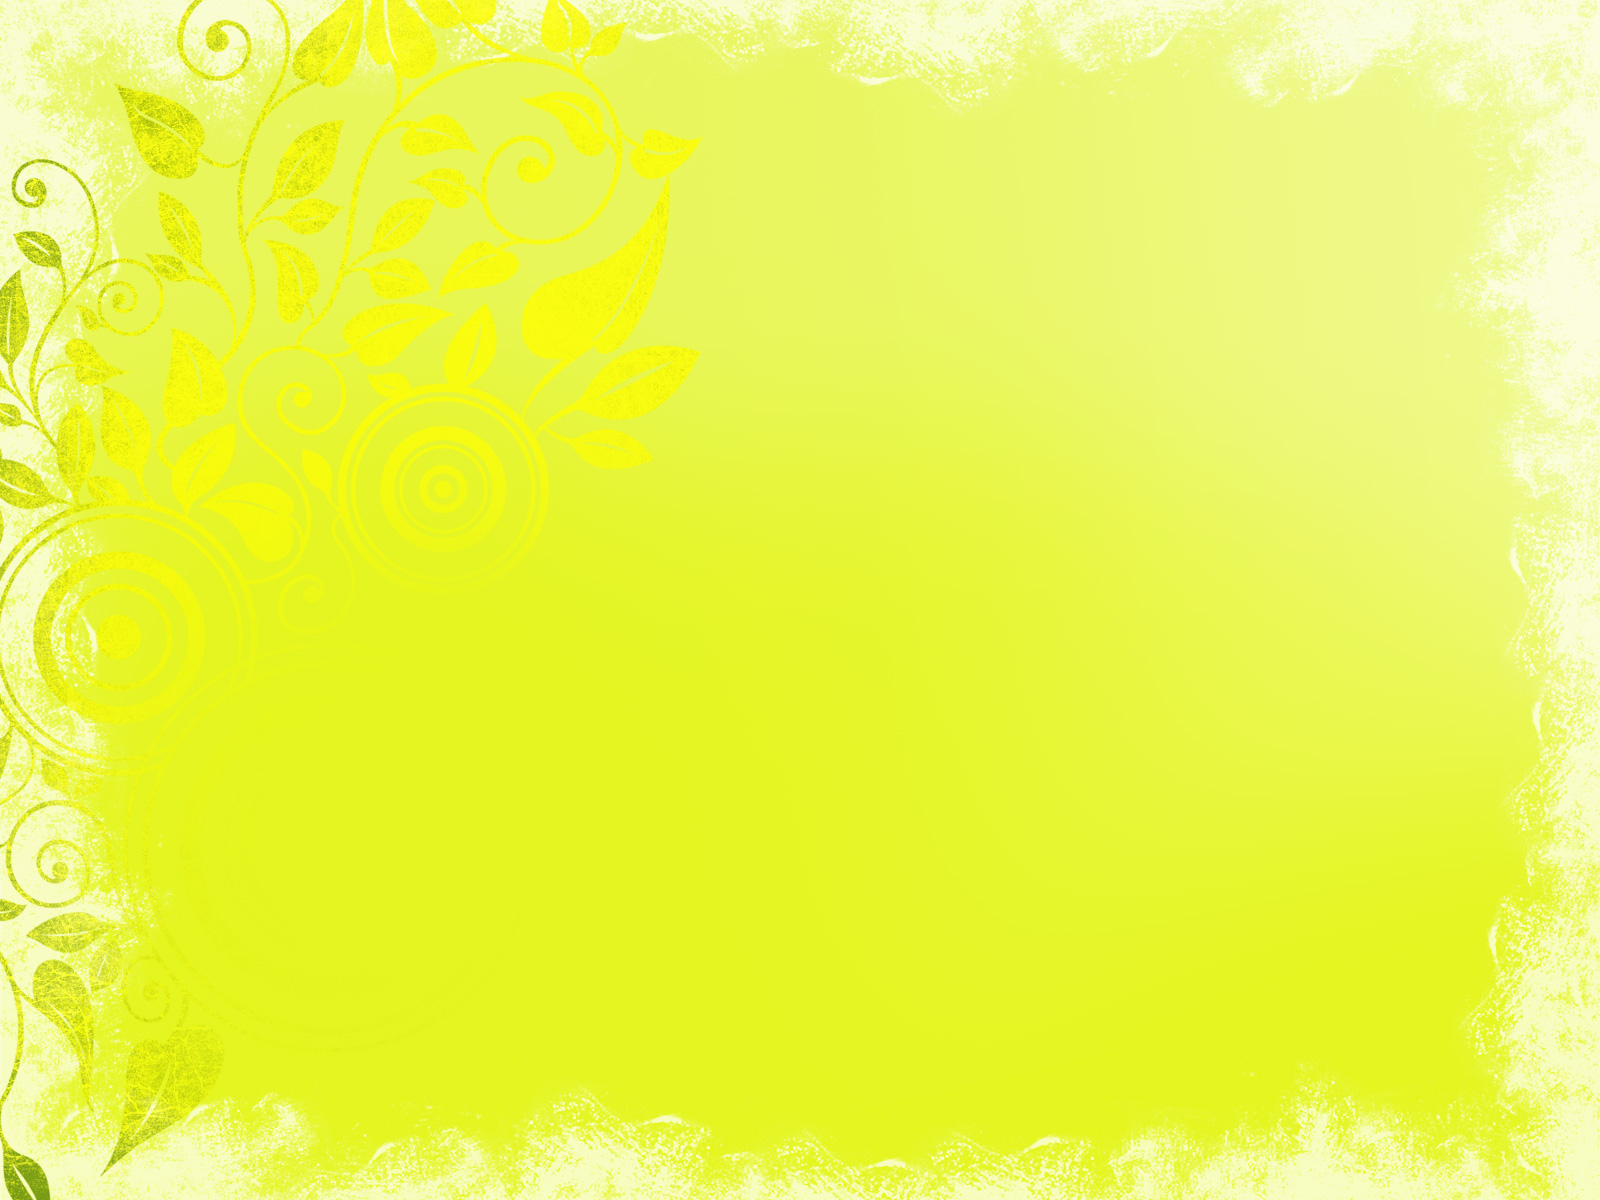 Floral yellow ornament frame backgrounds